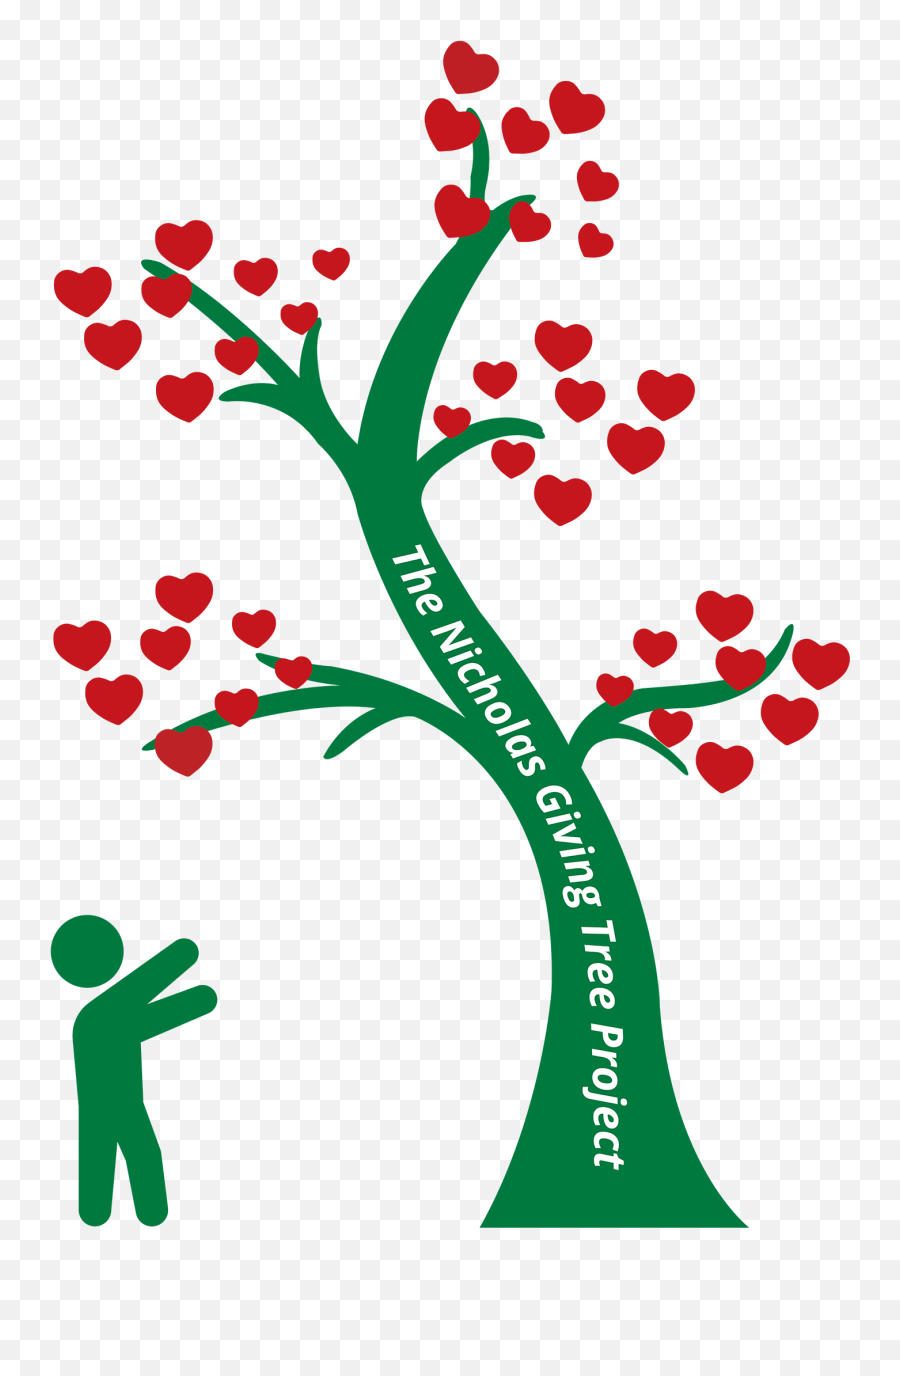 I Think This Kind Of Humanity Kindness - Kindness To Nature Clipart Emoji,Kindness Clipart